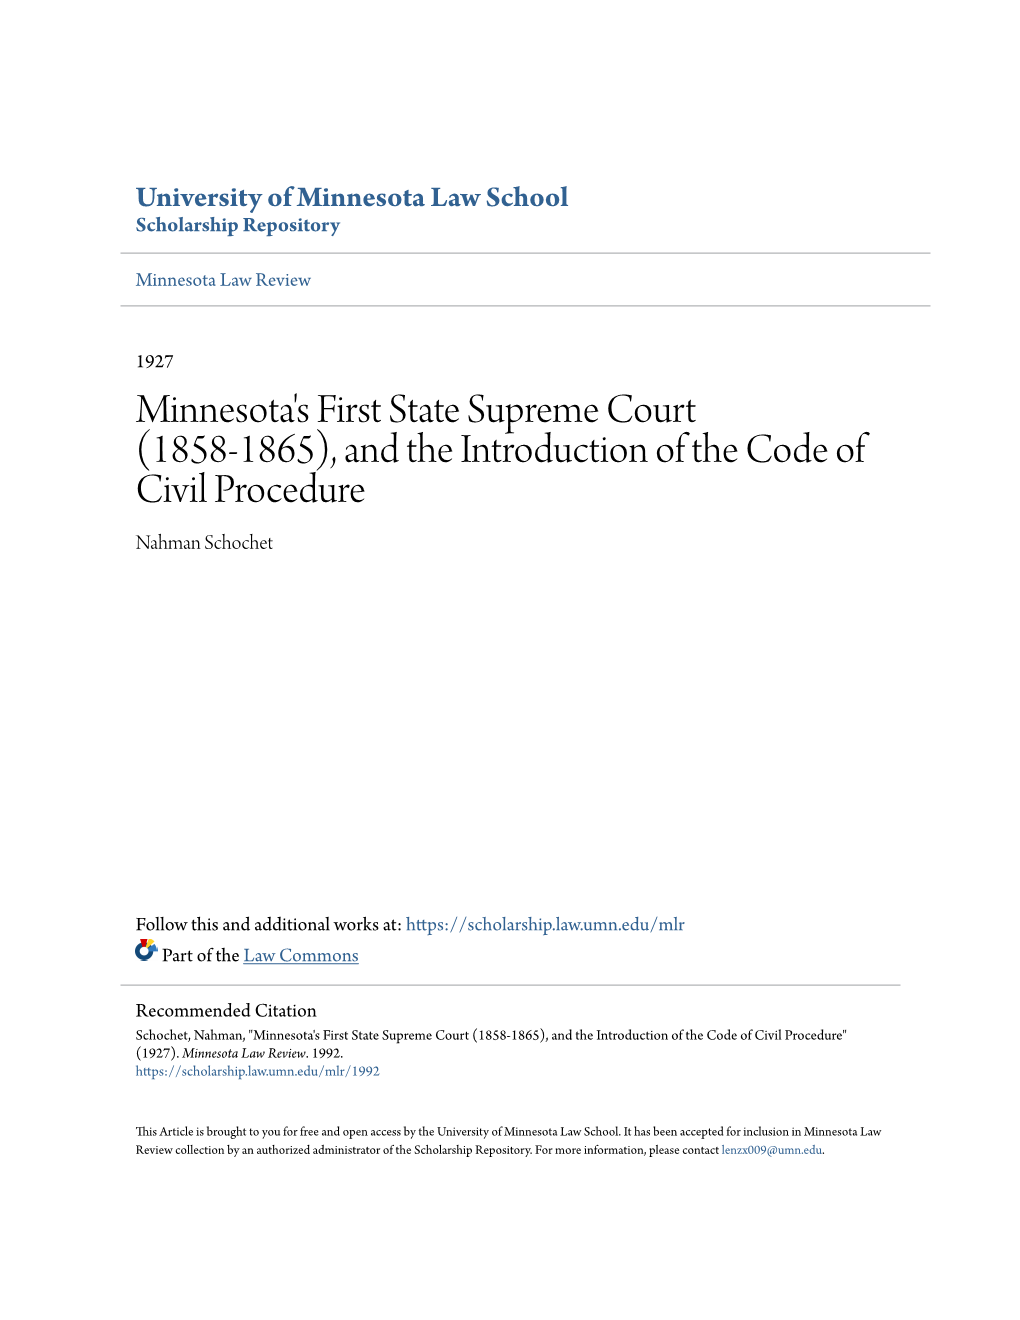 Minnesota's First State Supreme Court (1858-1865), and the Introduction of the Code of Civil Procedure Nahman Schochet